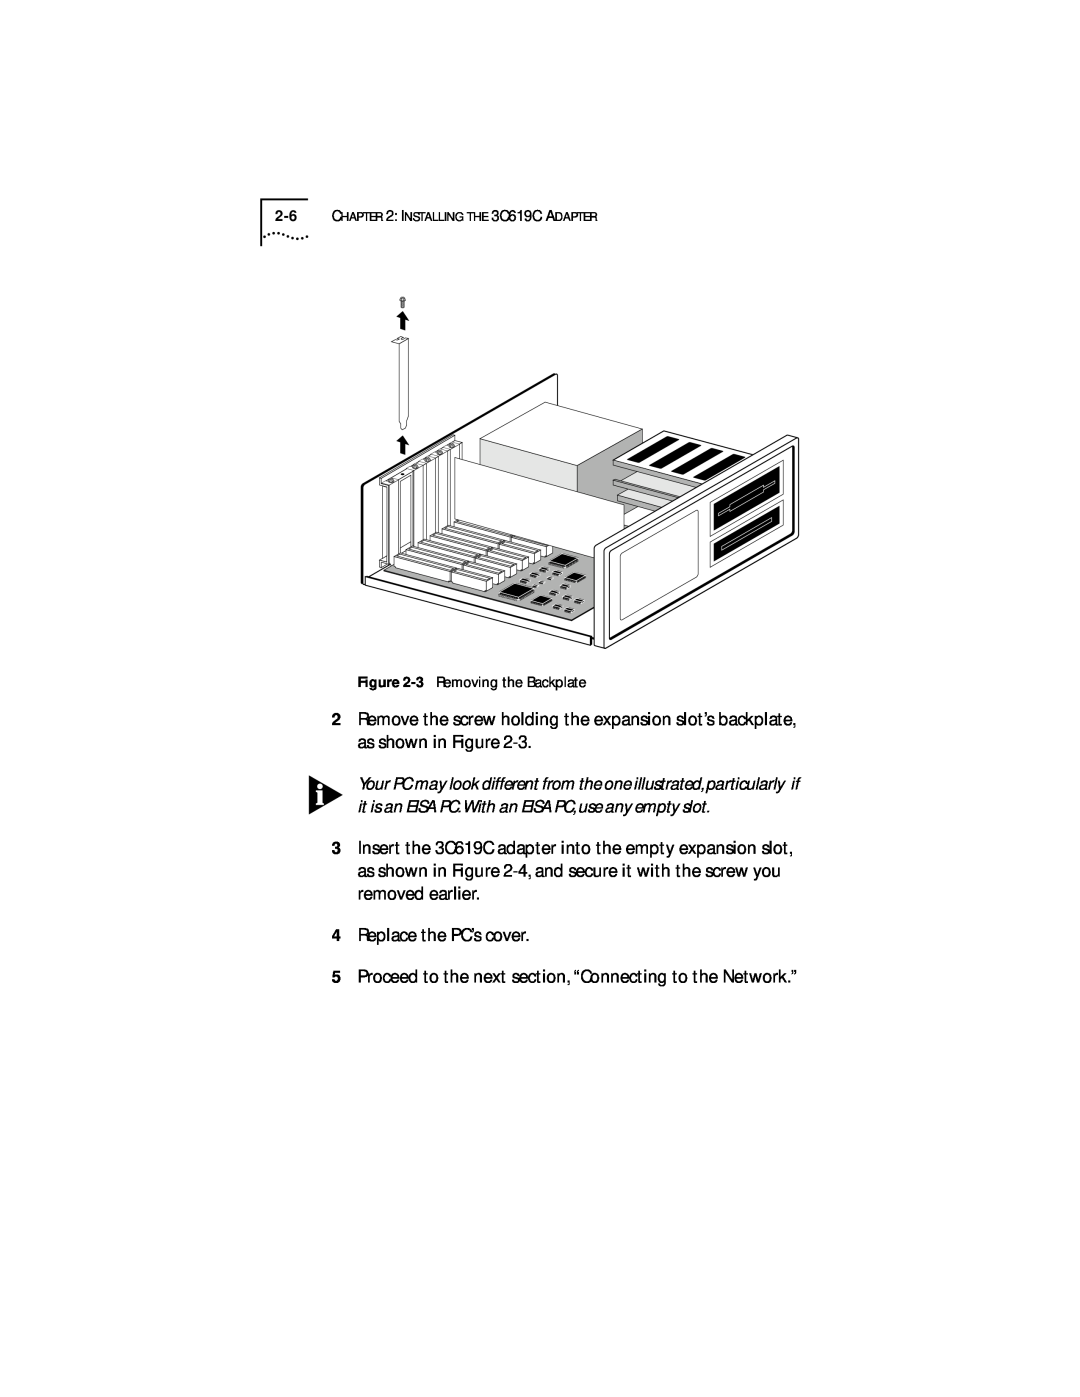 IBM 09-0572-000 manual Replace the PC’s cover 